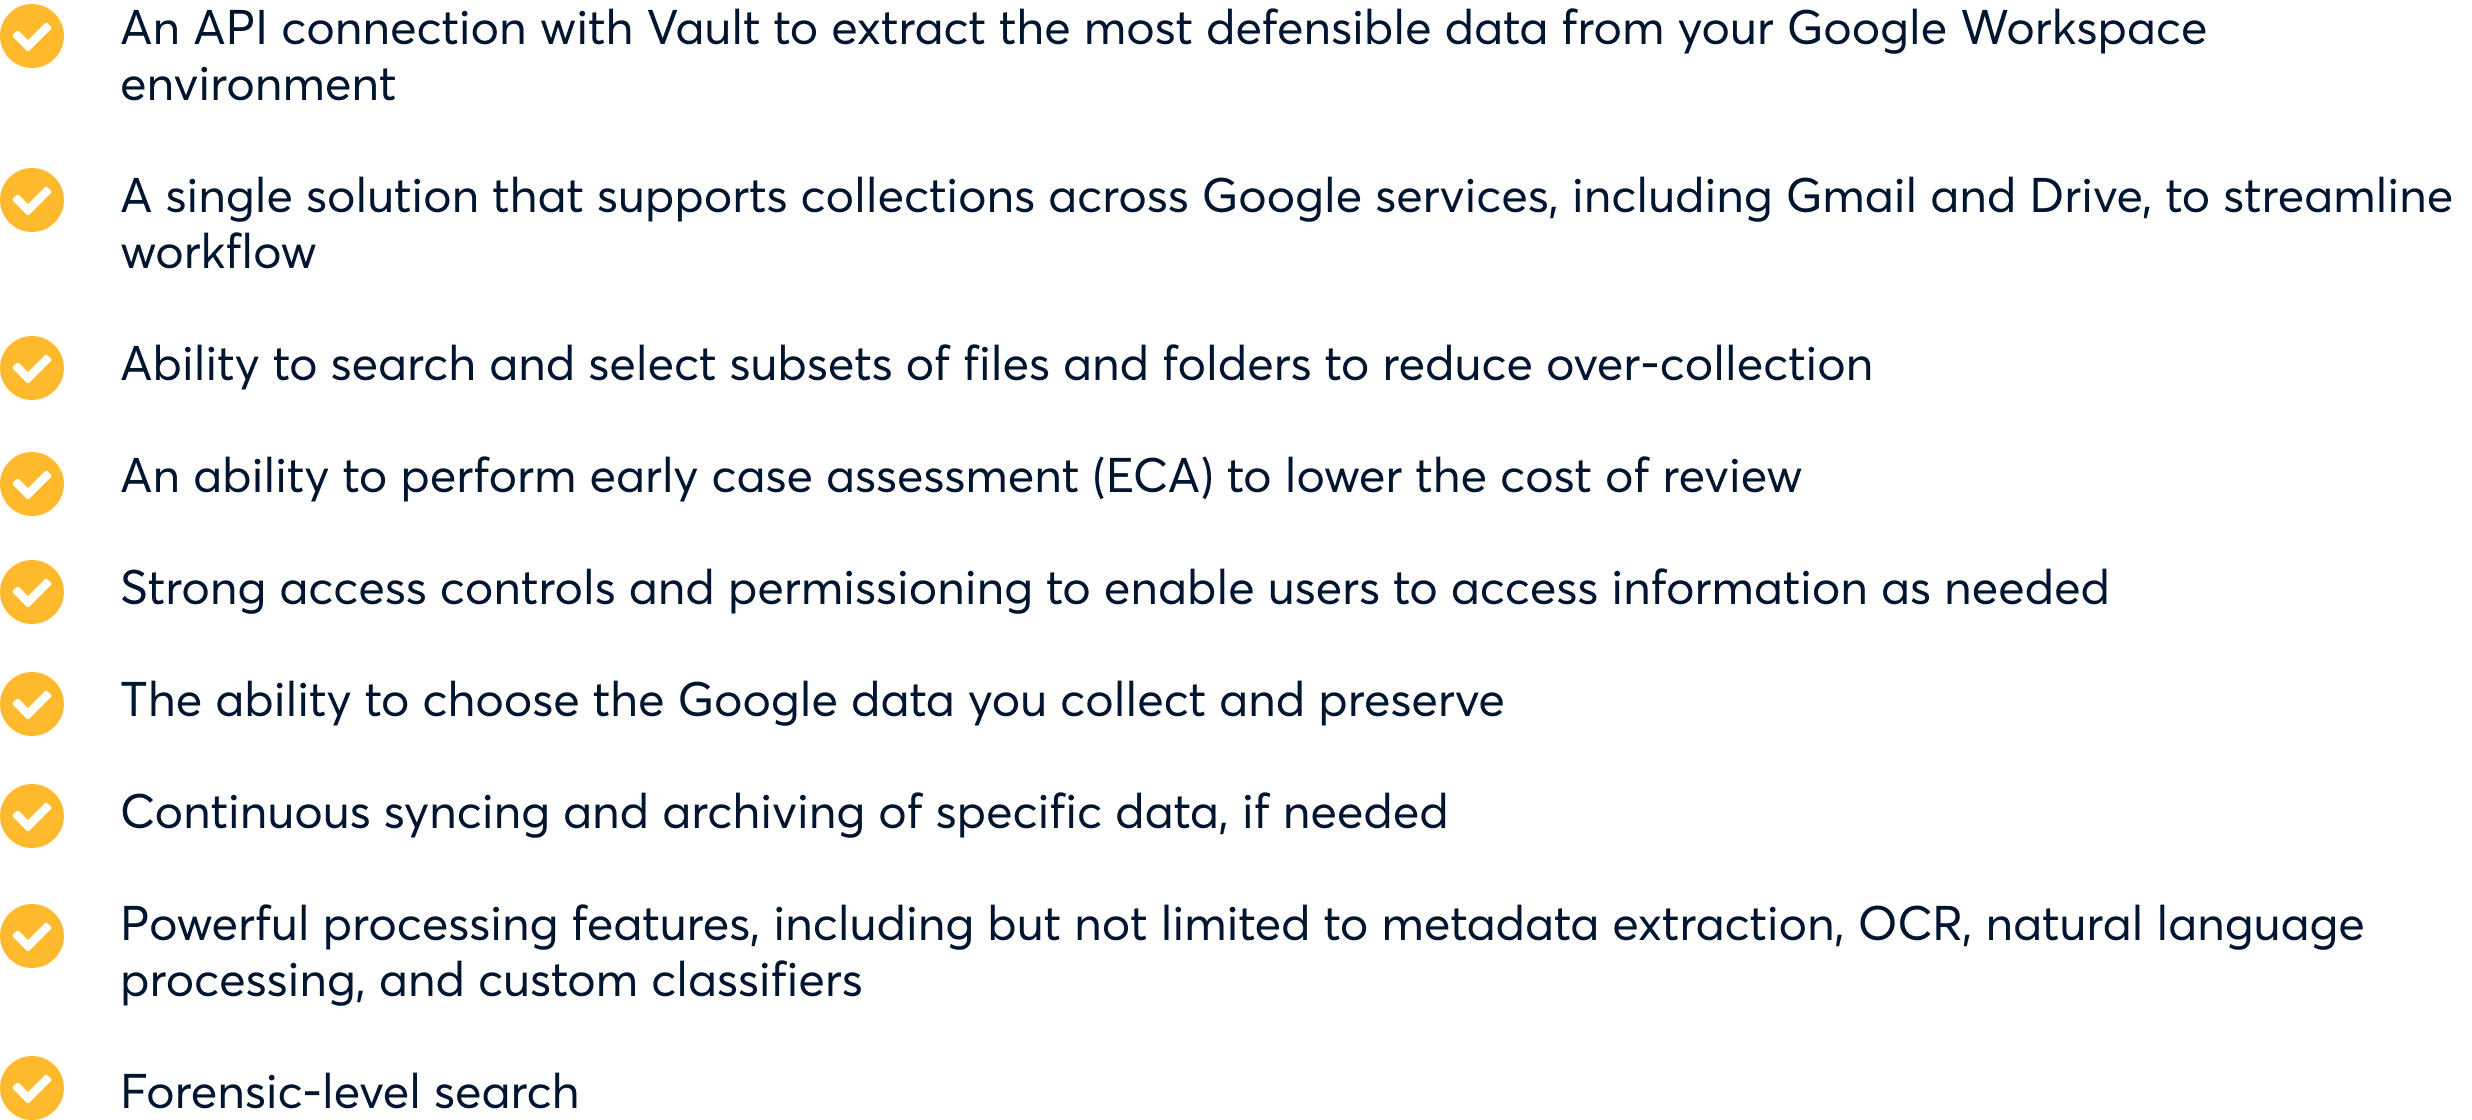 blog-image-google-ediscovery-solution-feature-must-haves